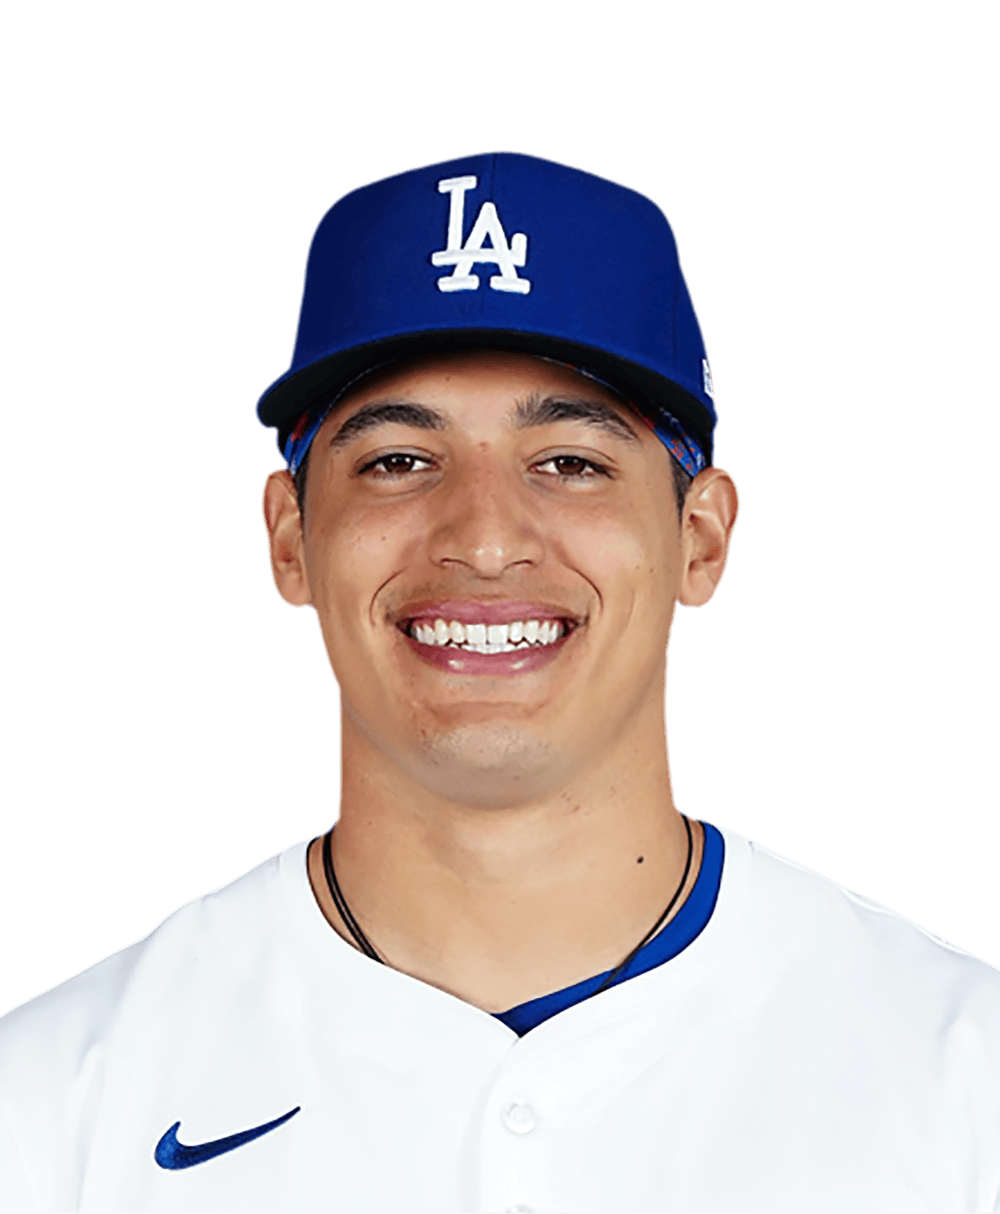 Diego Cartaya, Bobby Miller Among 5 Dodgers Prospects Ranked In